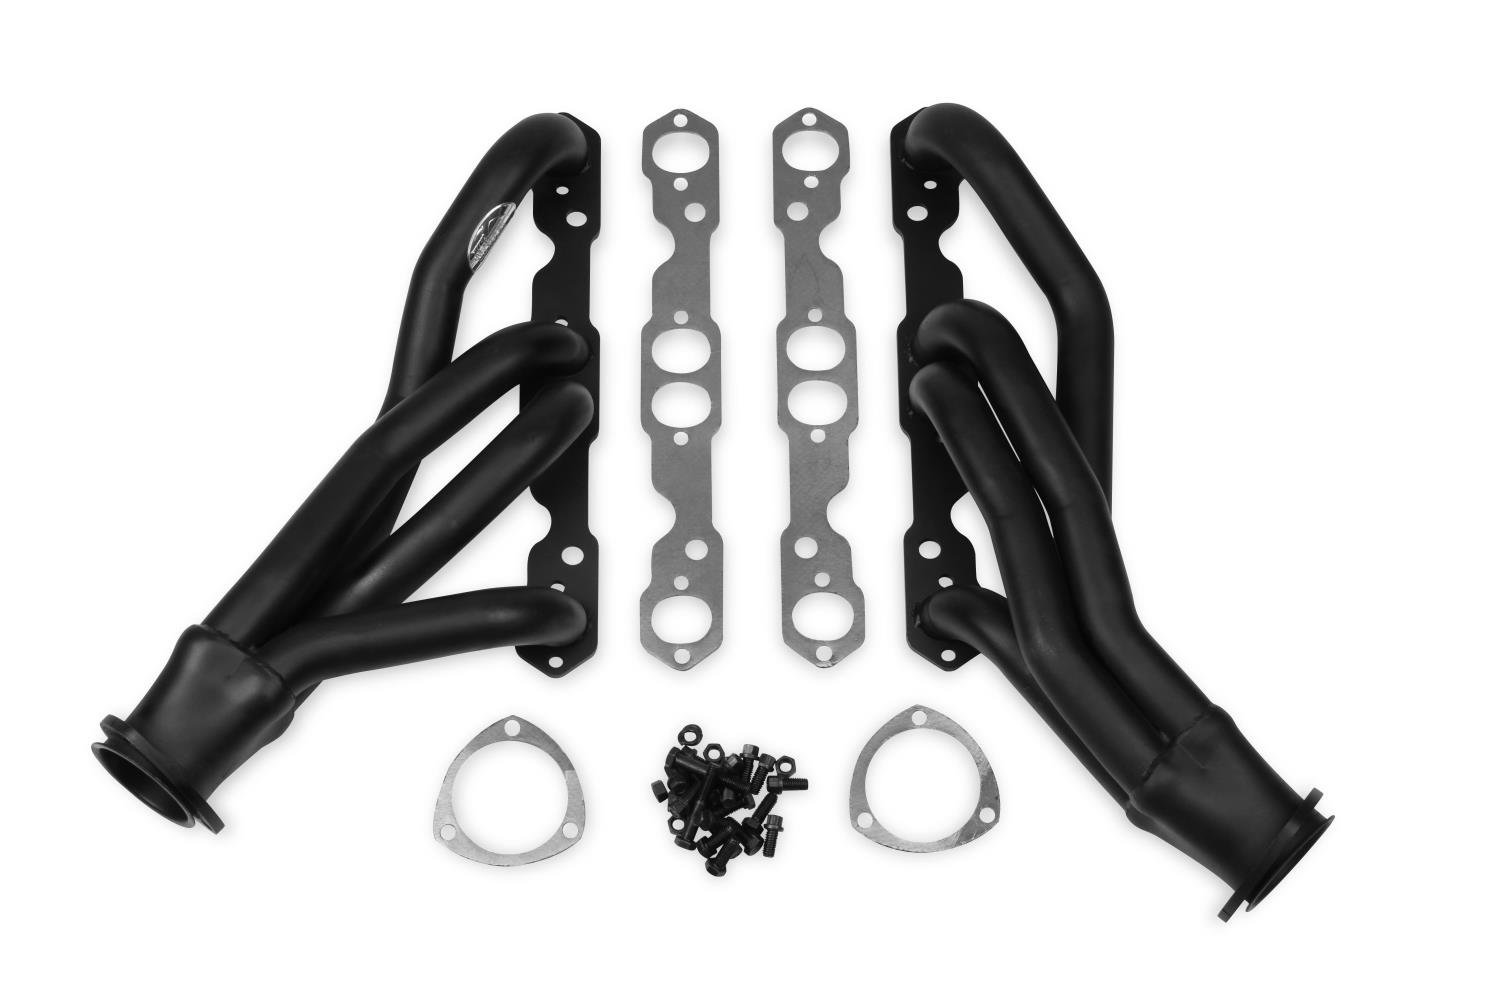 2466 Competition Shorty Headers Chevy Small Block V8 265-400